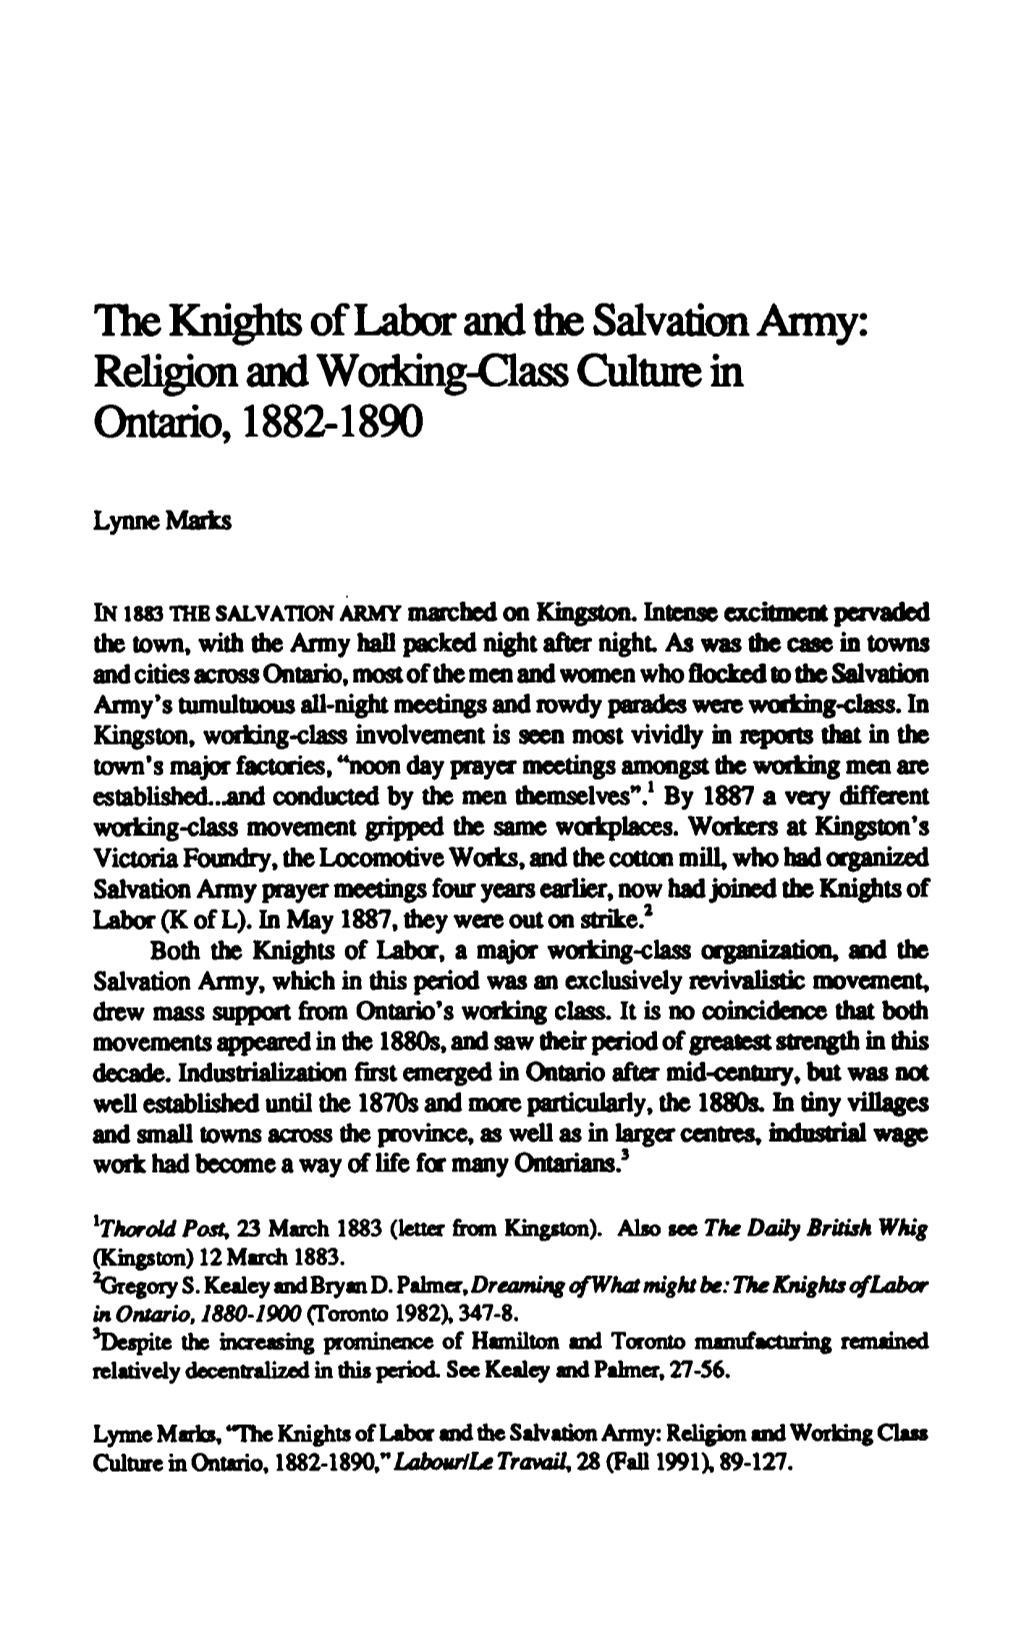 Religion and Working-Class Culture in Ontario, 1882-1890